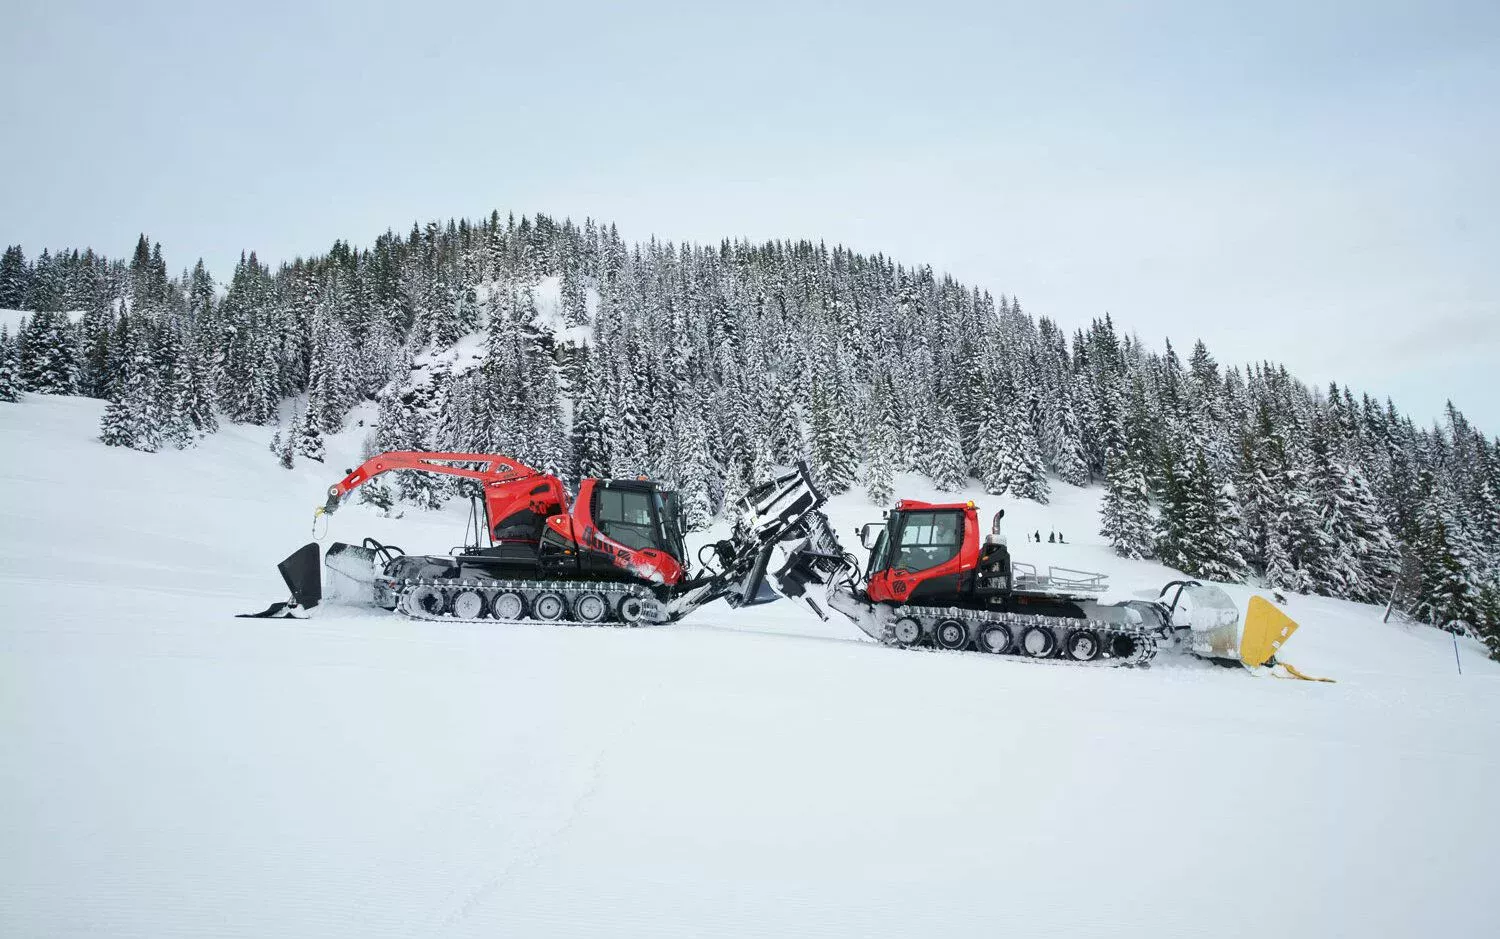 Two PistenBully 400 on the slope